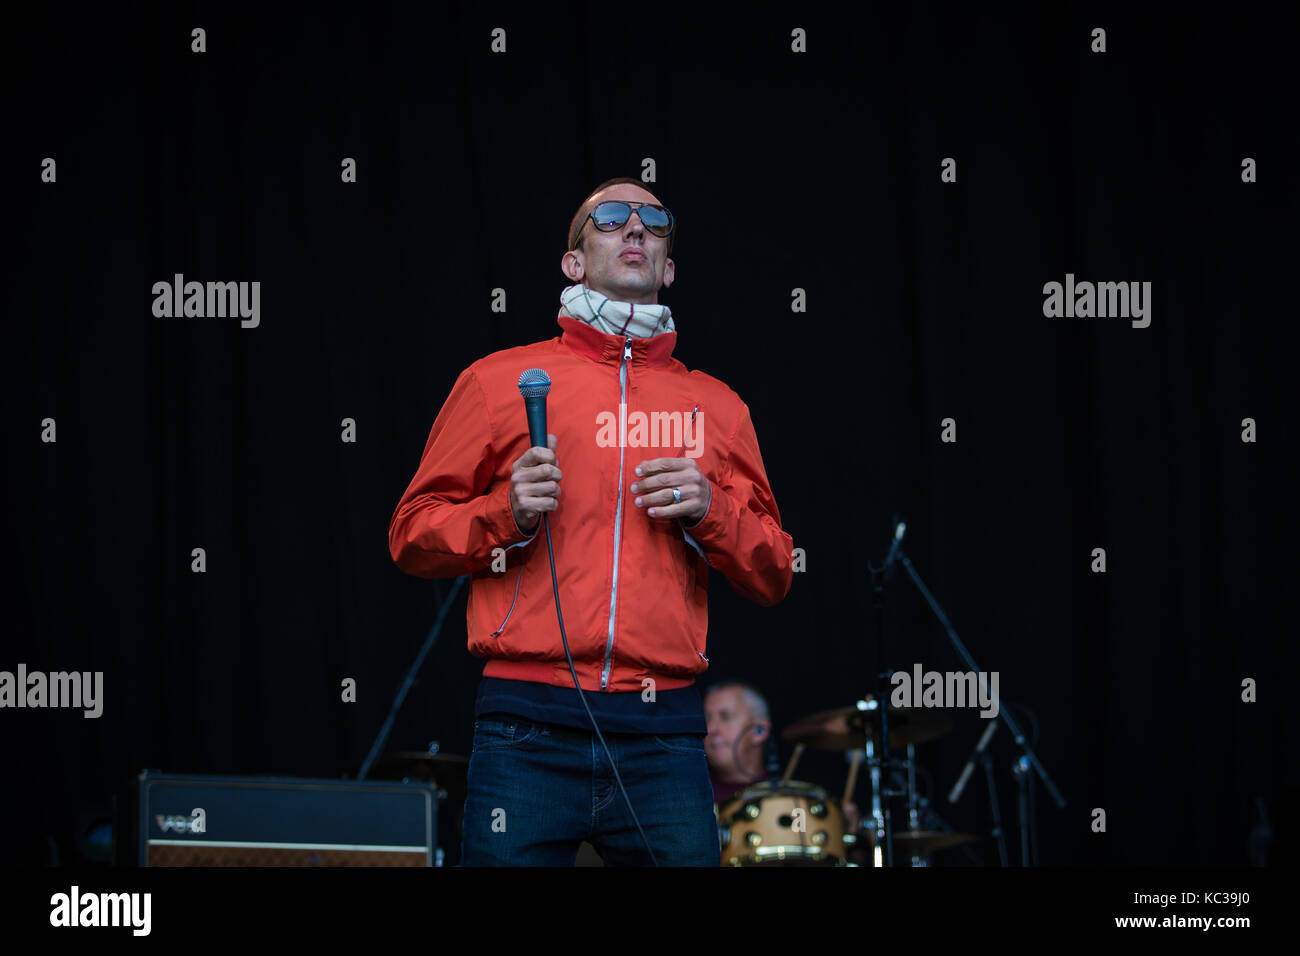 The English singer, songwriter and musician Richard Ashcroft performs a live concert during the Norwegian music festival Bergenfest 2017 in Bergen. Richard Ashcroft is known as the lead vocalist of the English rock band The Verve. Norway, 14/06 2017. Stock Photo